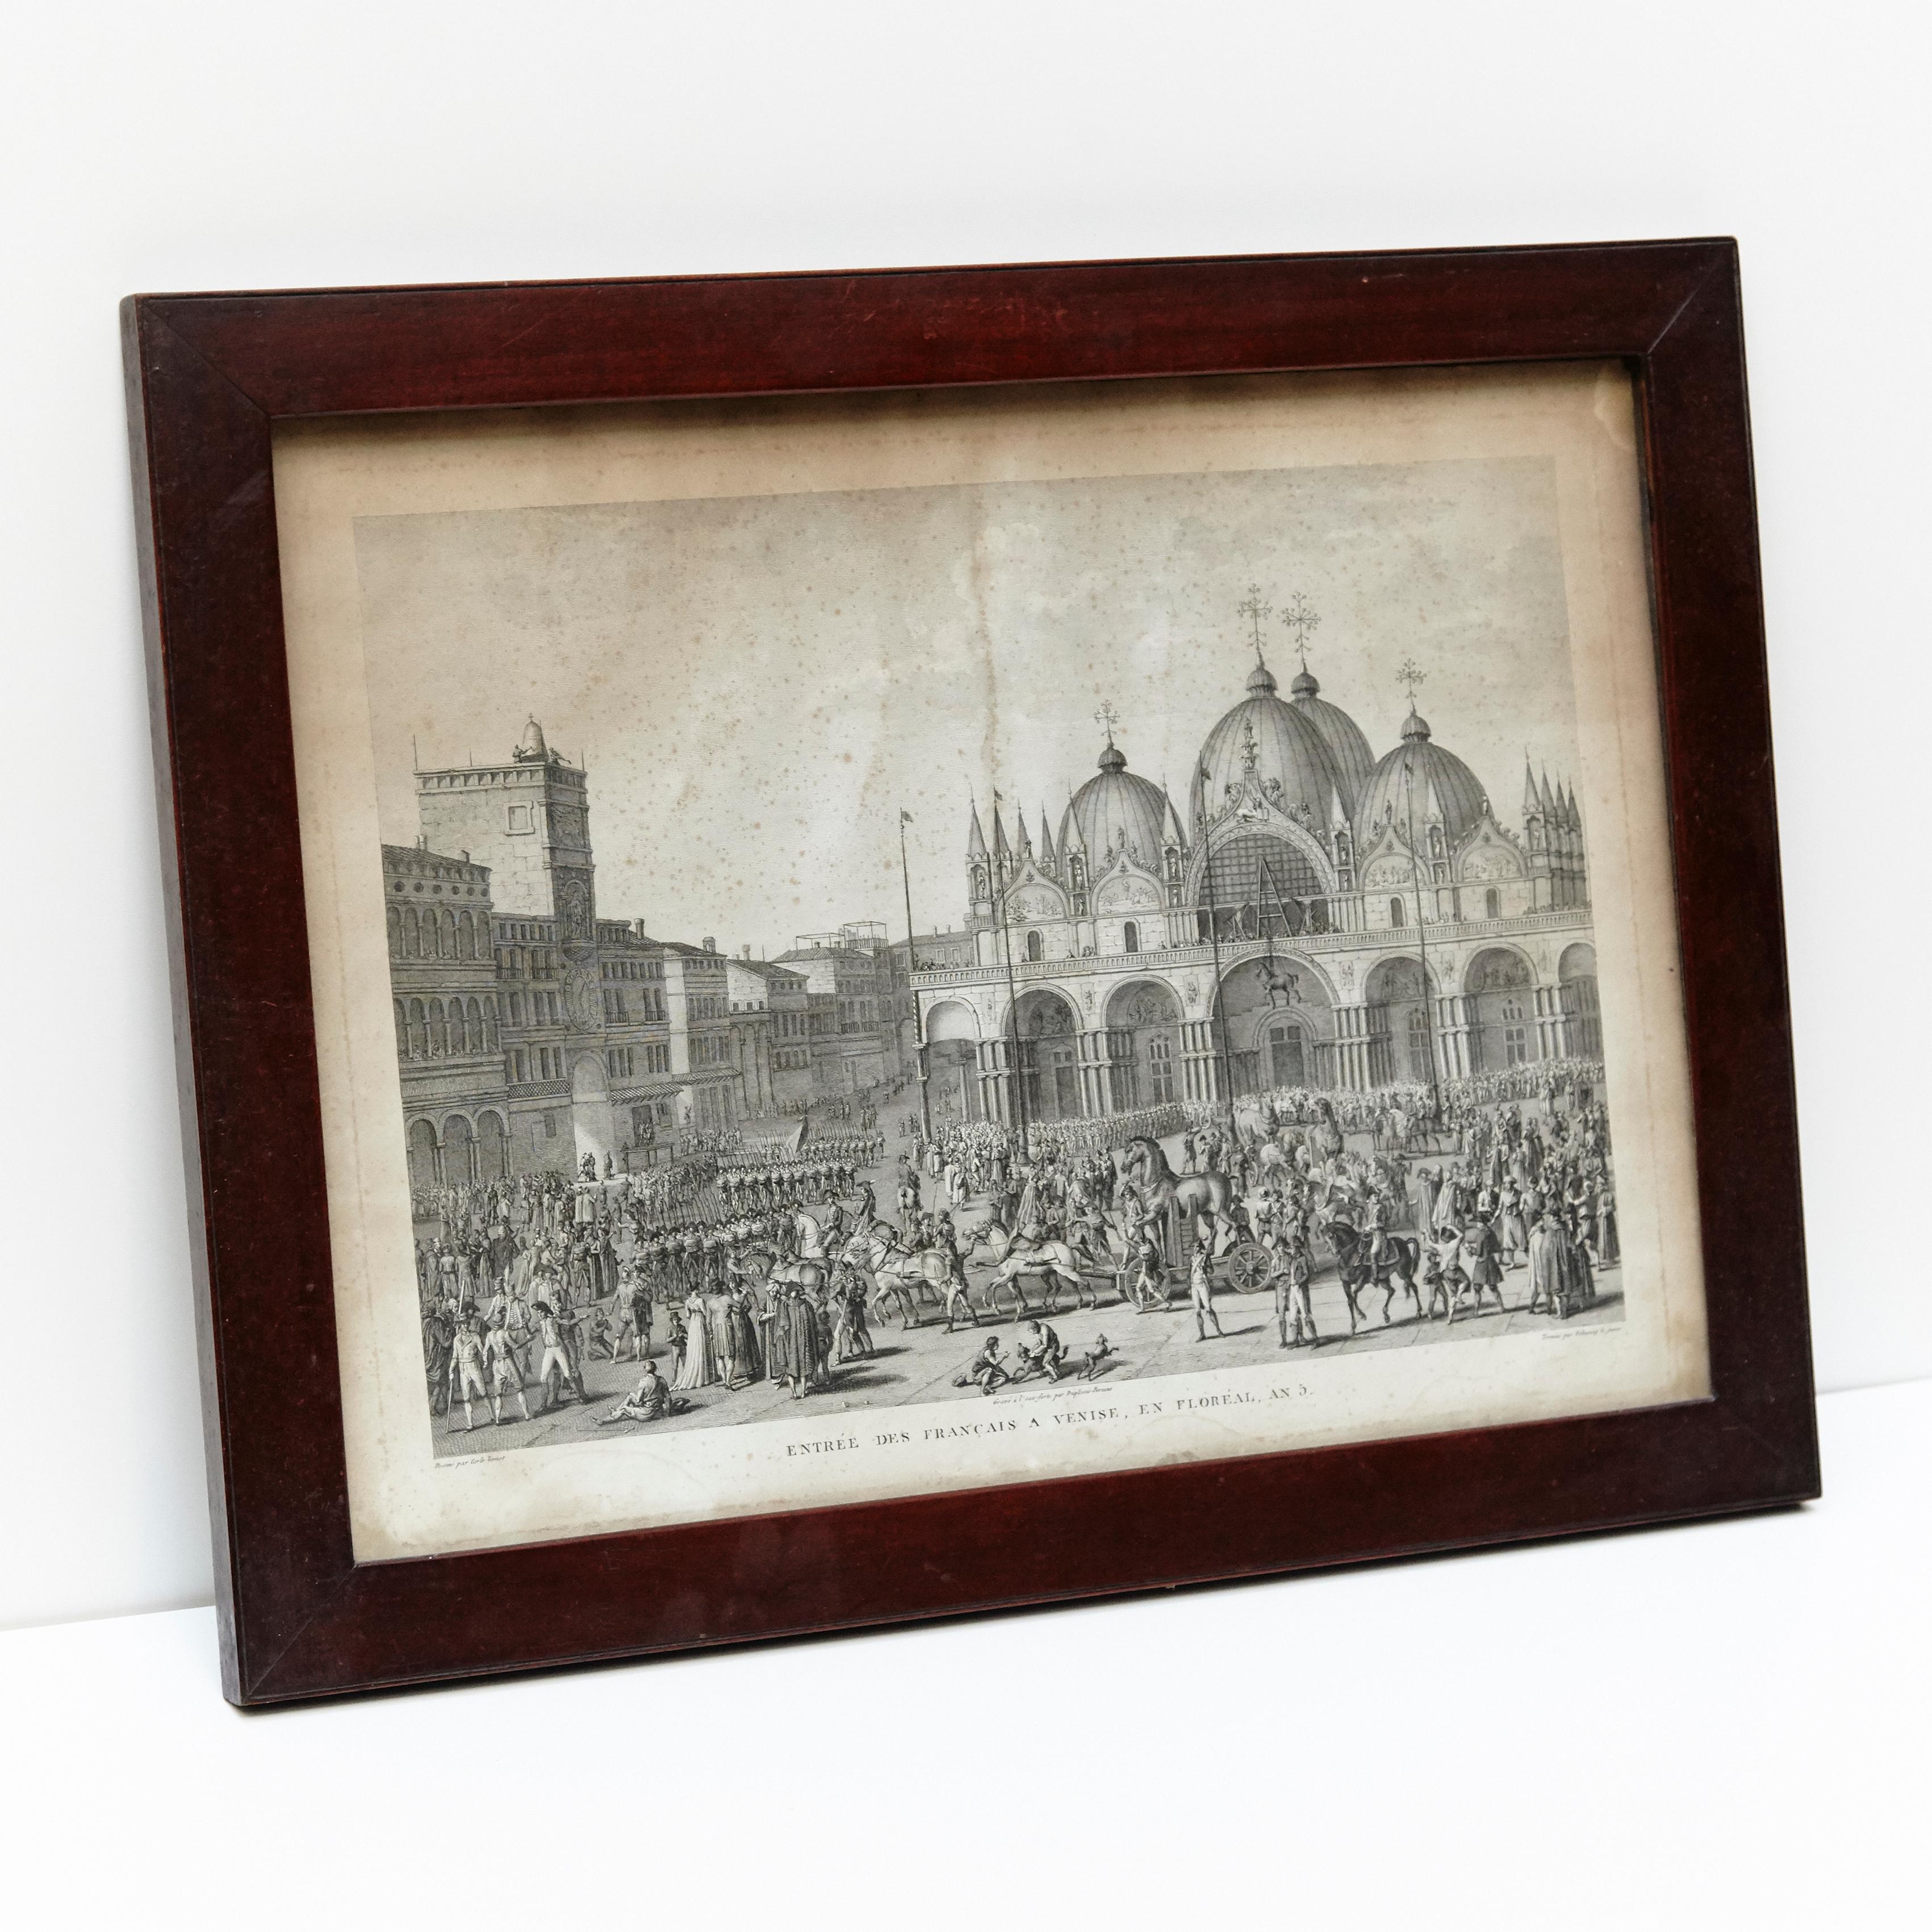 19th century Lithography of Venice in black and white

In original condition, with wear consistent of age and use.